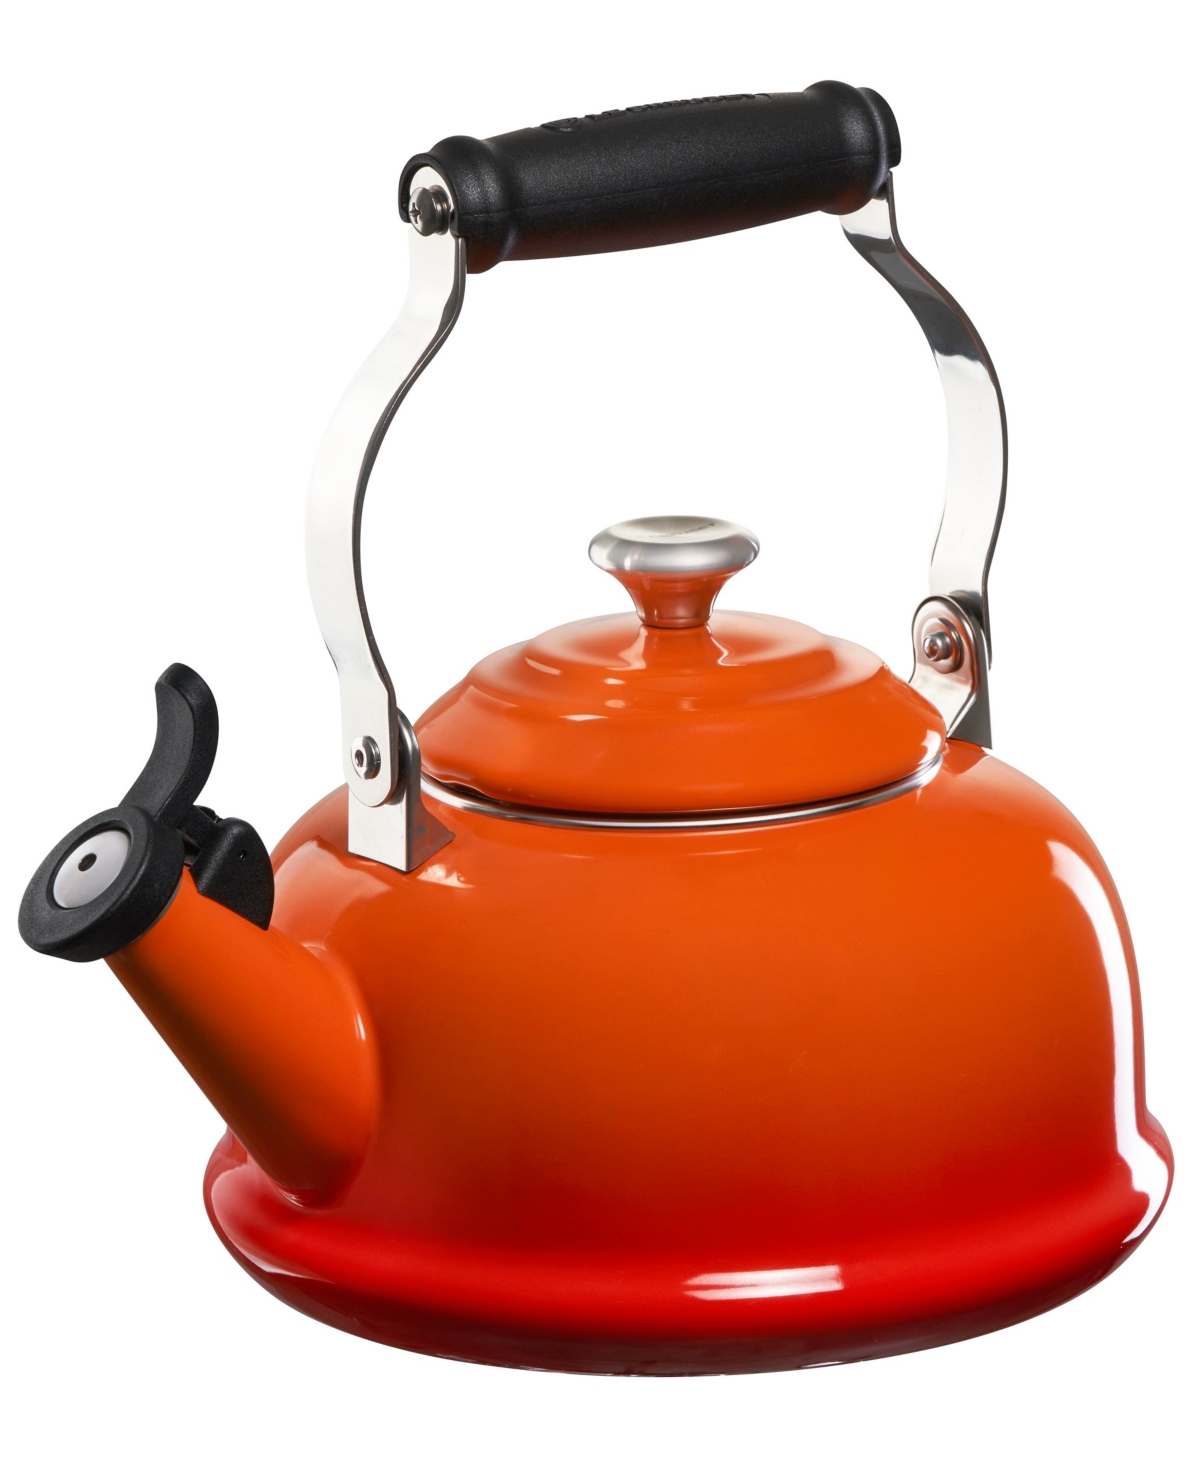 Le Creuset 1.7-quart Stainless Steel Whistling Tea Kettle In Flame